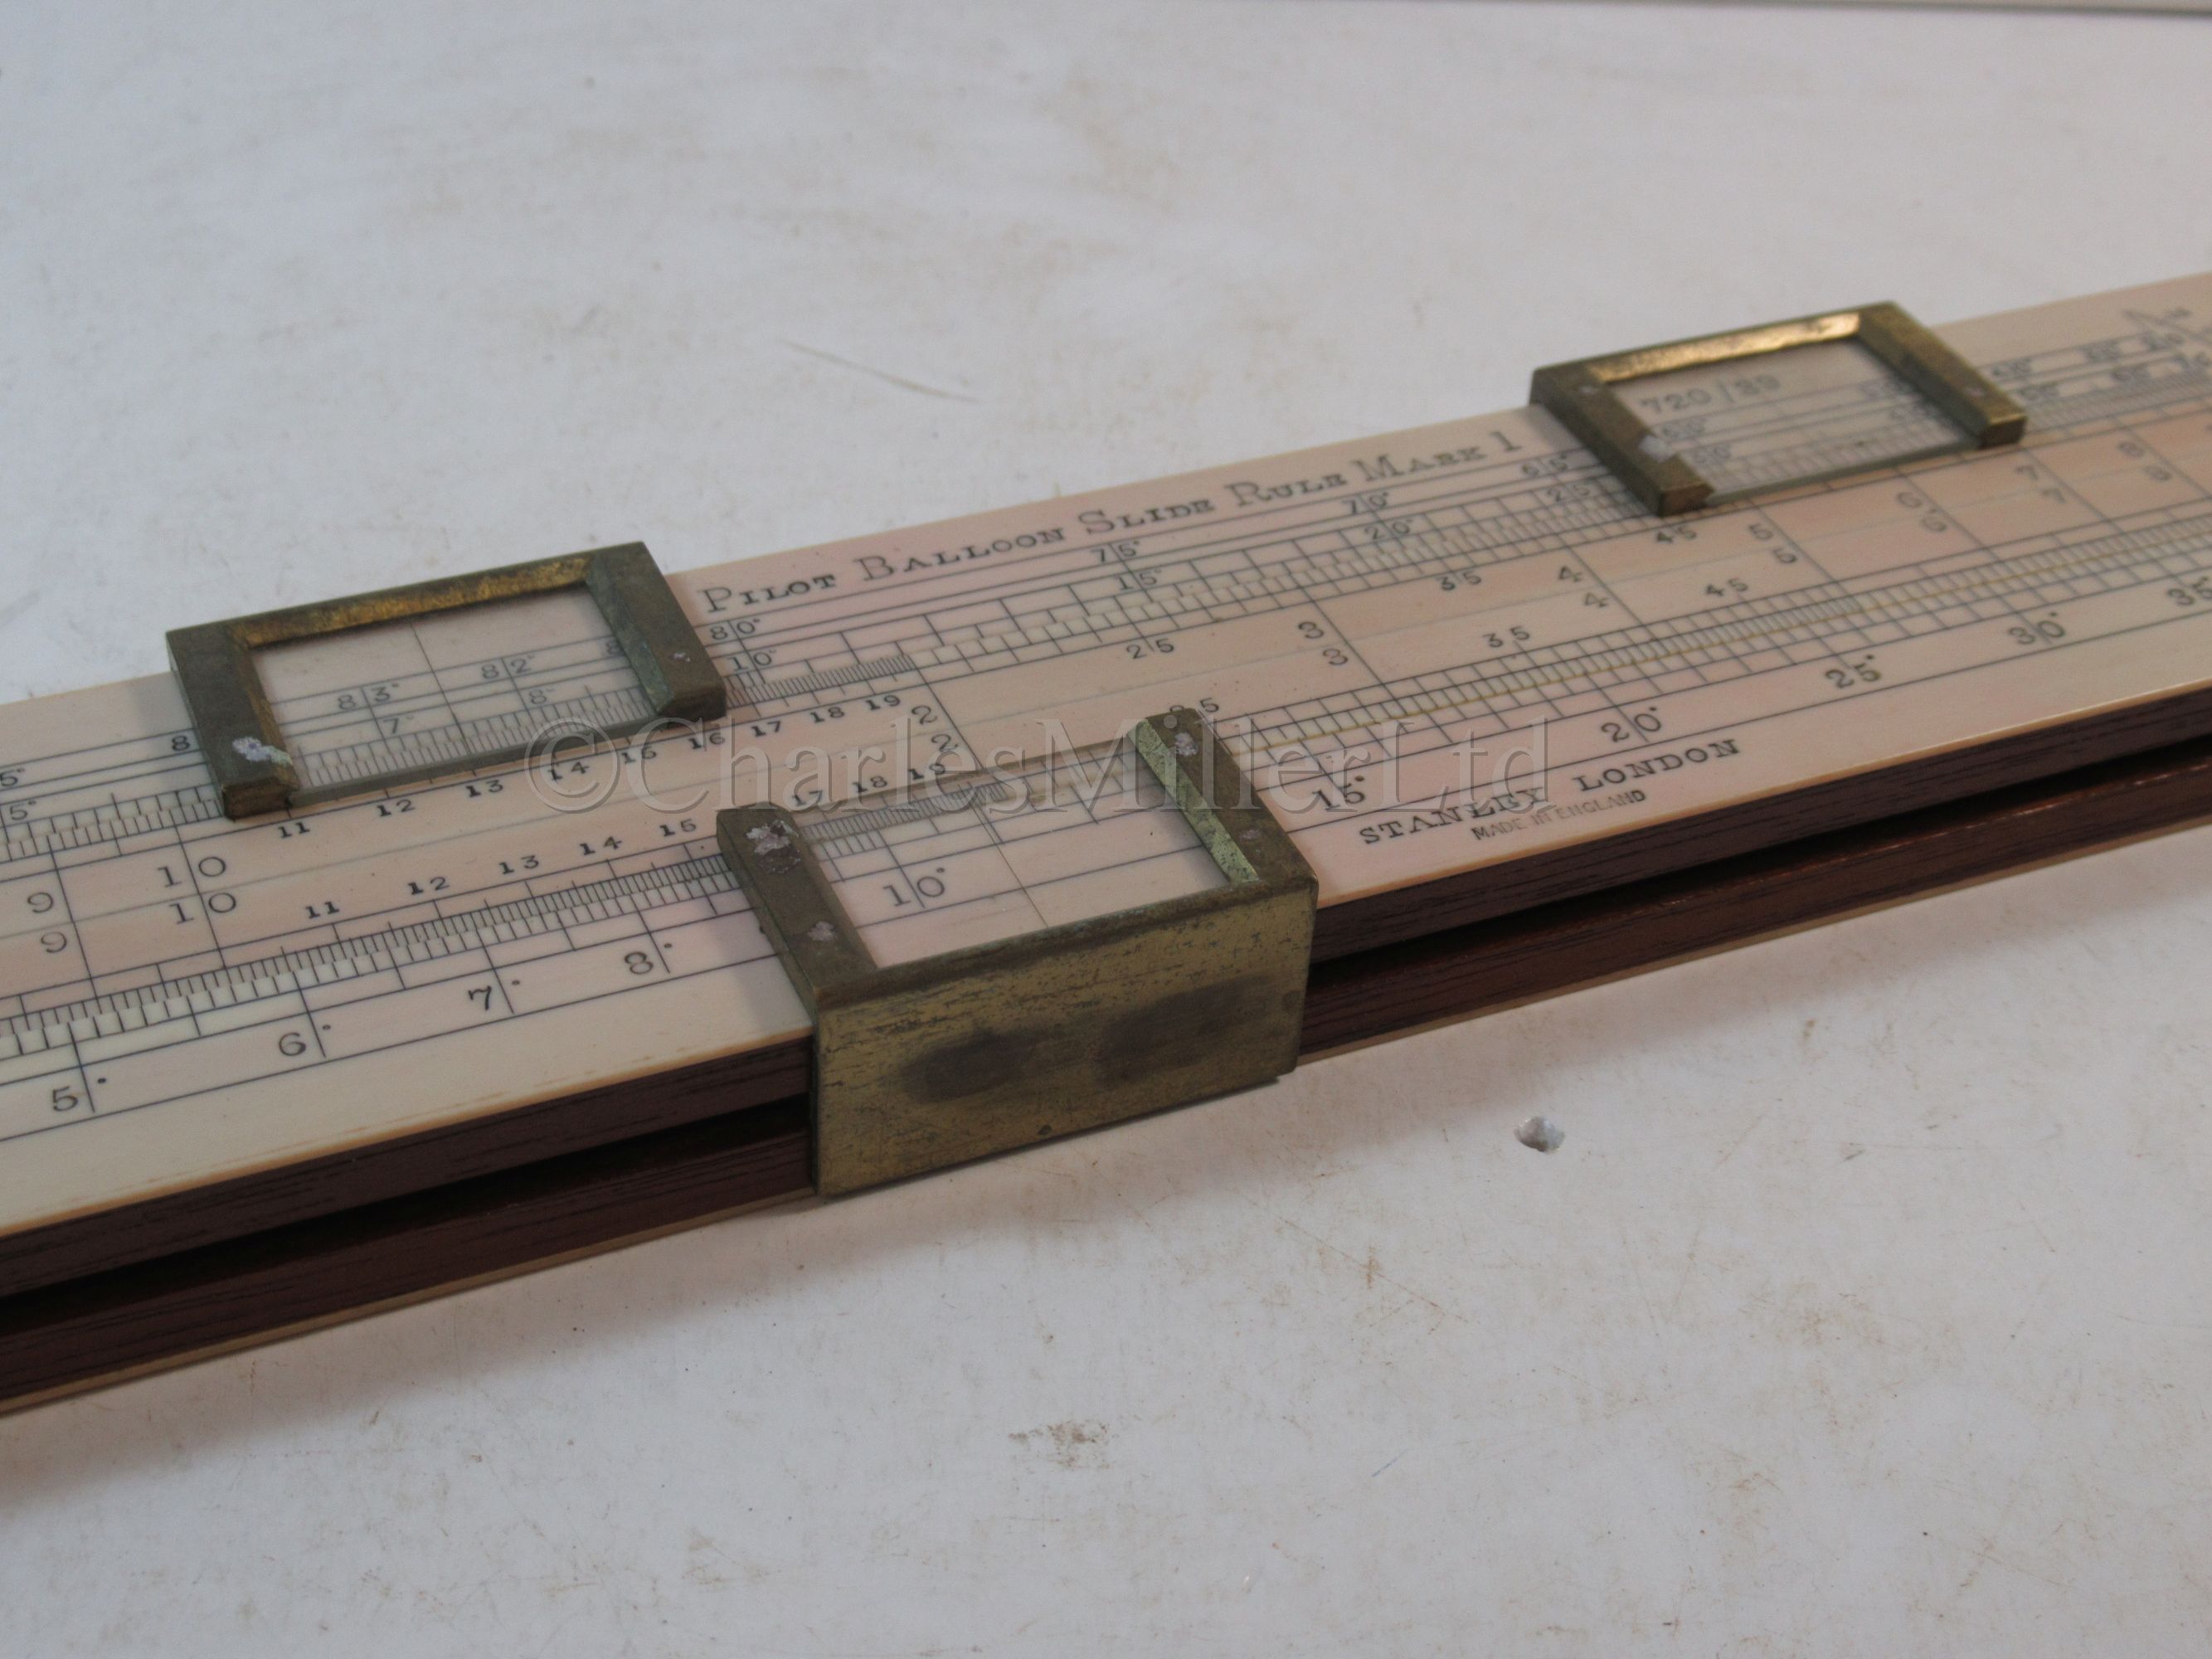 A RARE PILOT BALLOON SLIDE RULE BY STANLEY, CIRCA 1910 - Image 6 of 9